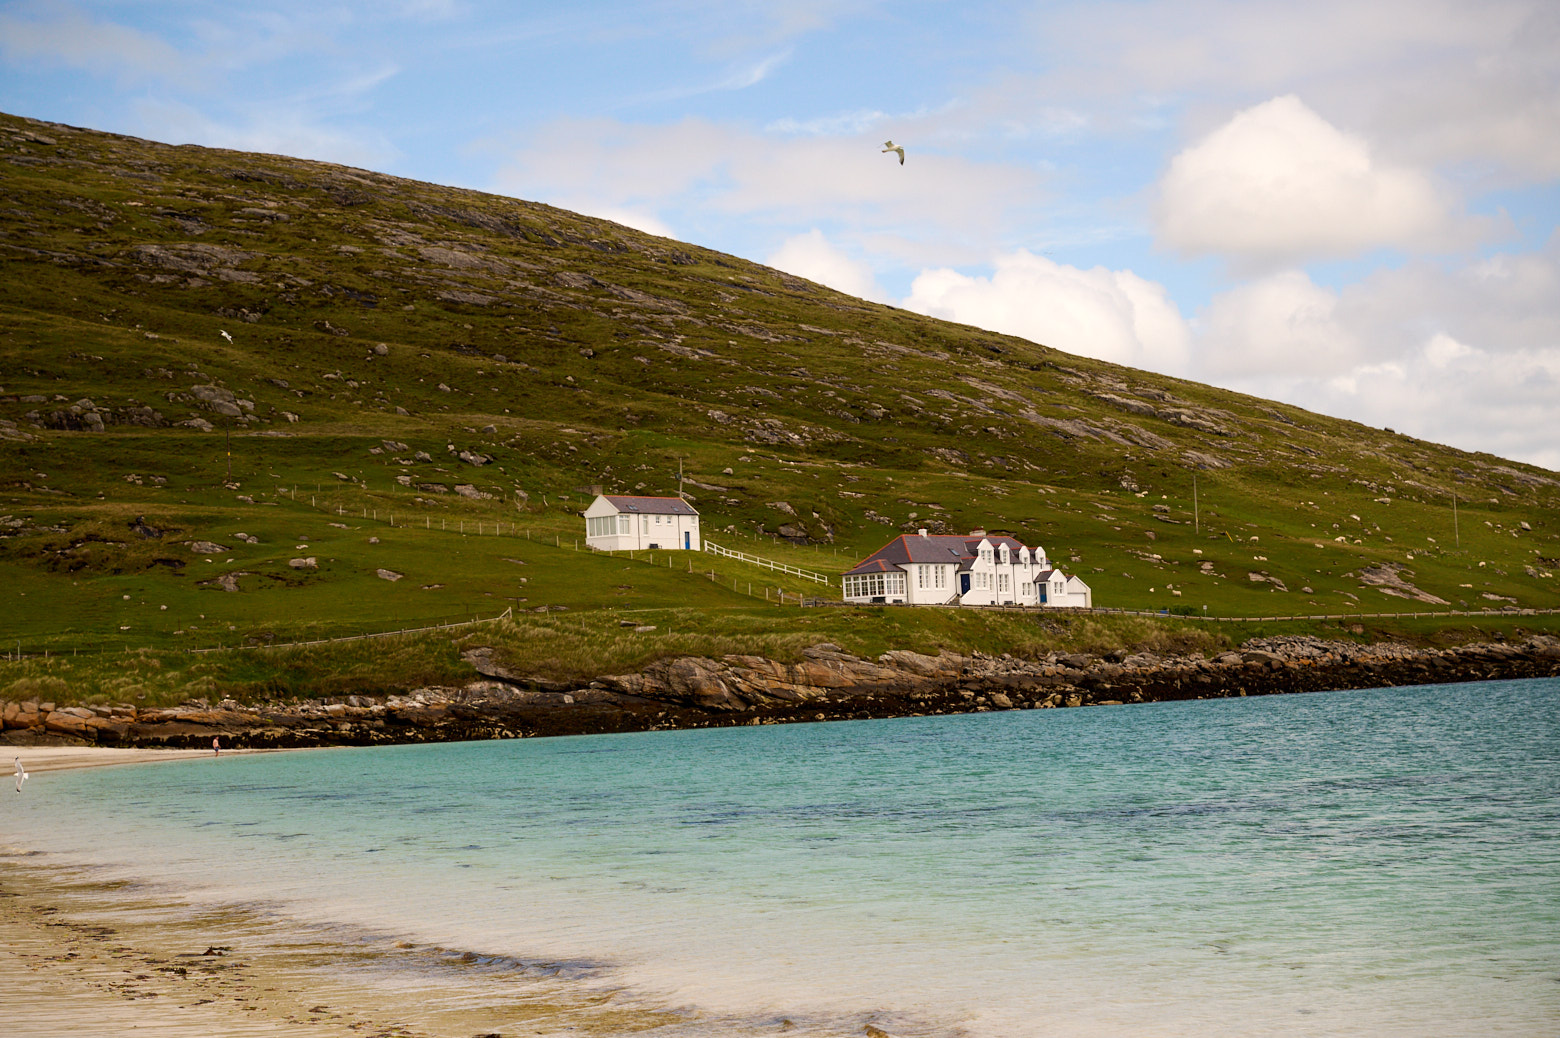 A walk along the famous beach on the Isle of Vatersay in the Outer Hebrides.